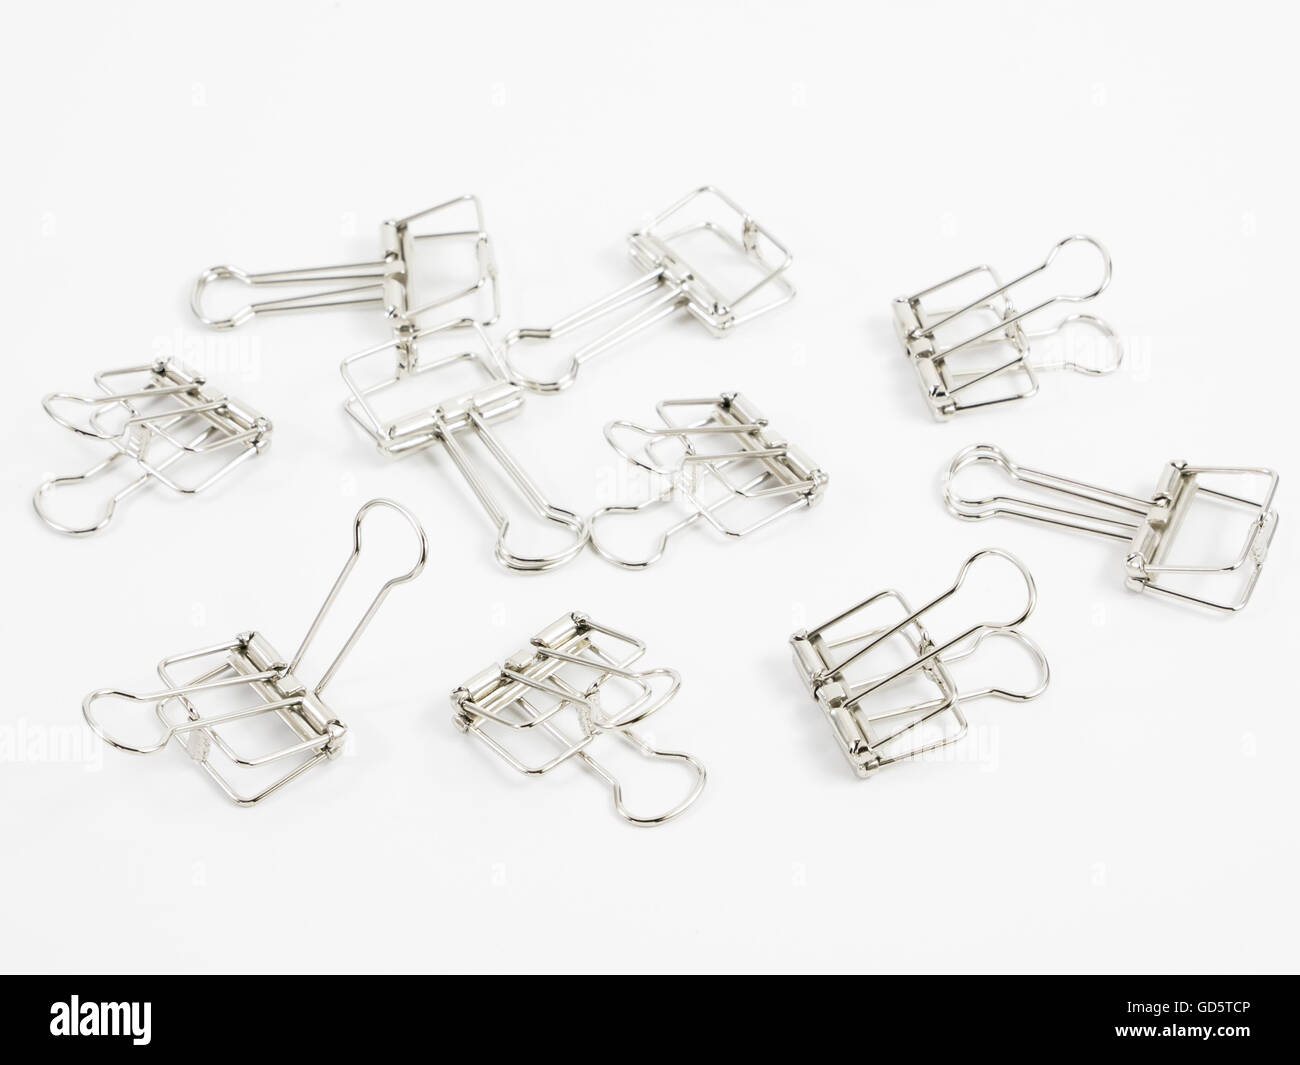 The silver binder clip (paper clip stationery Stock Photo - Alamy